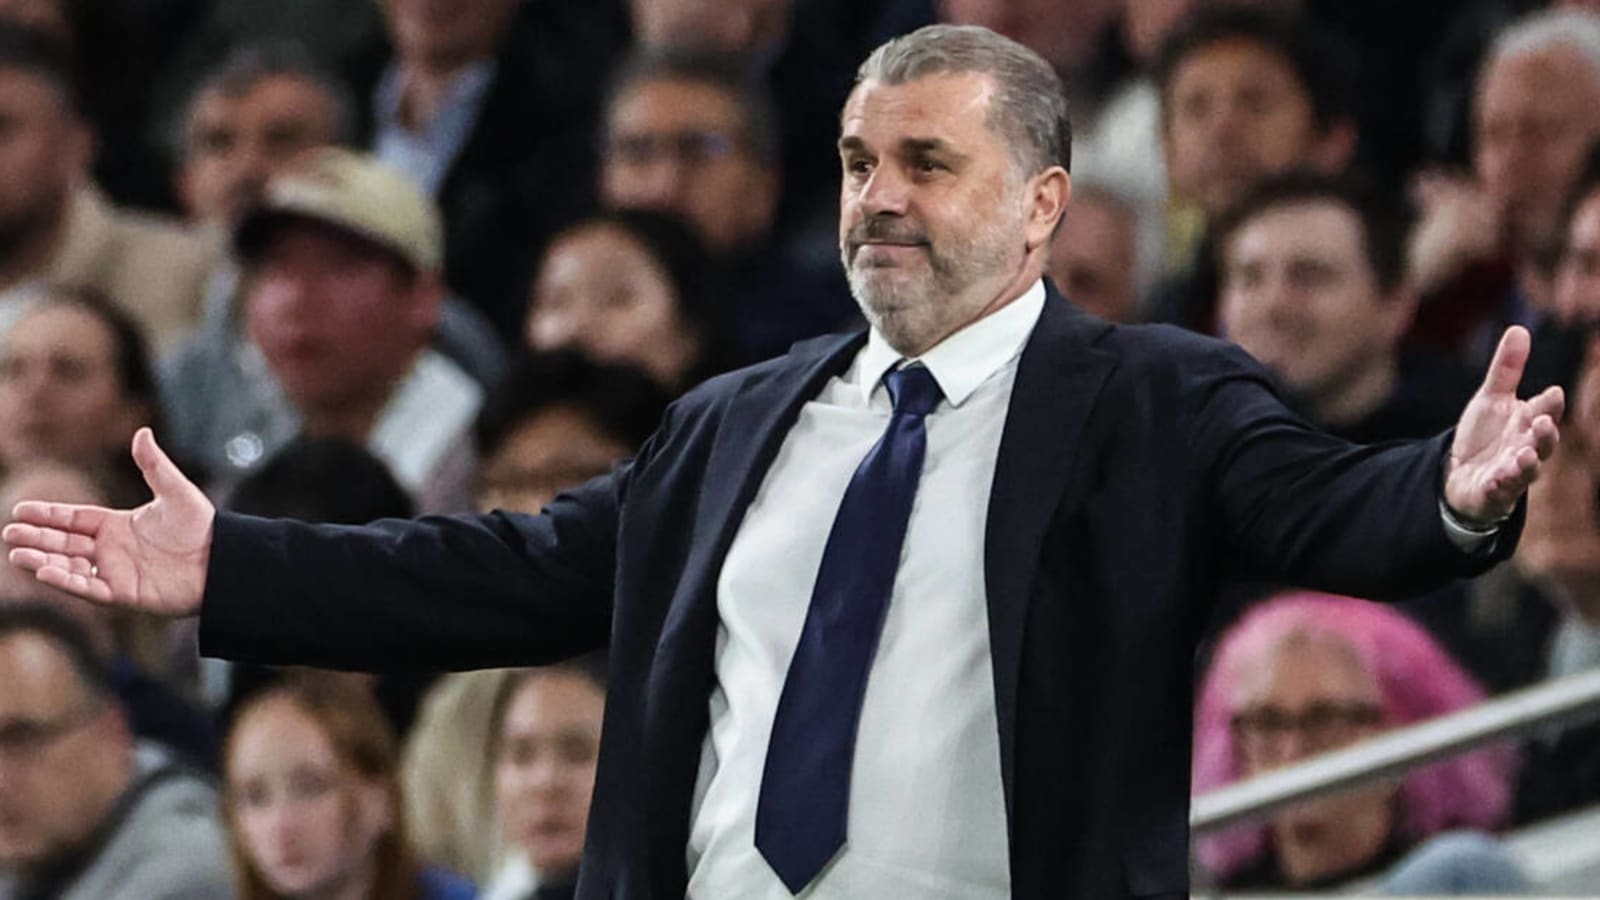 Club expert makes claim about Ange Postecoglou’s future at the club after recent outburst